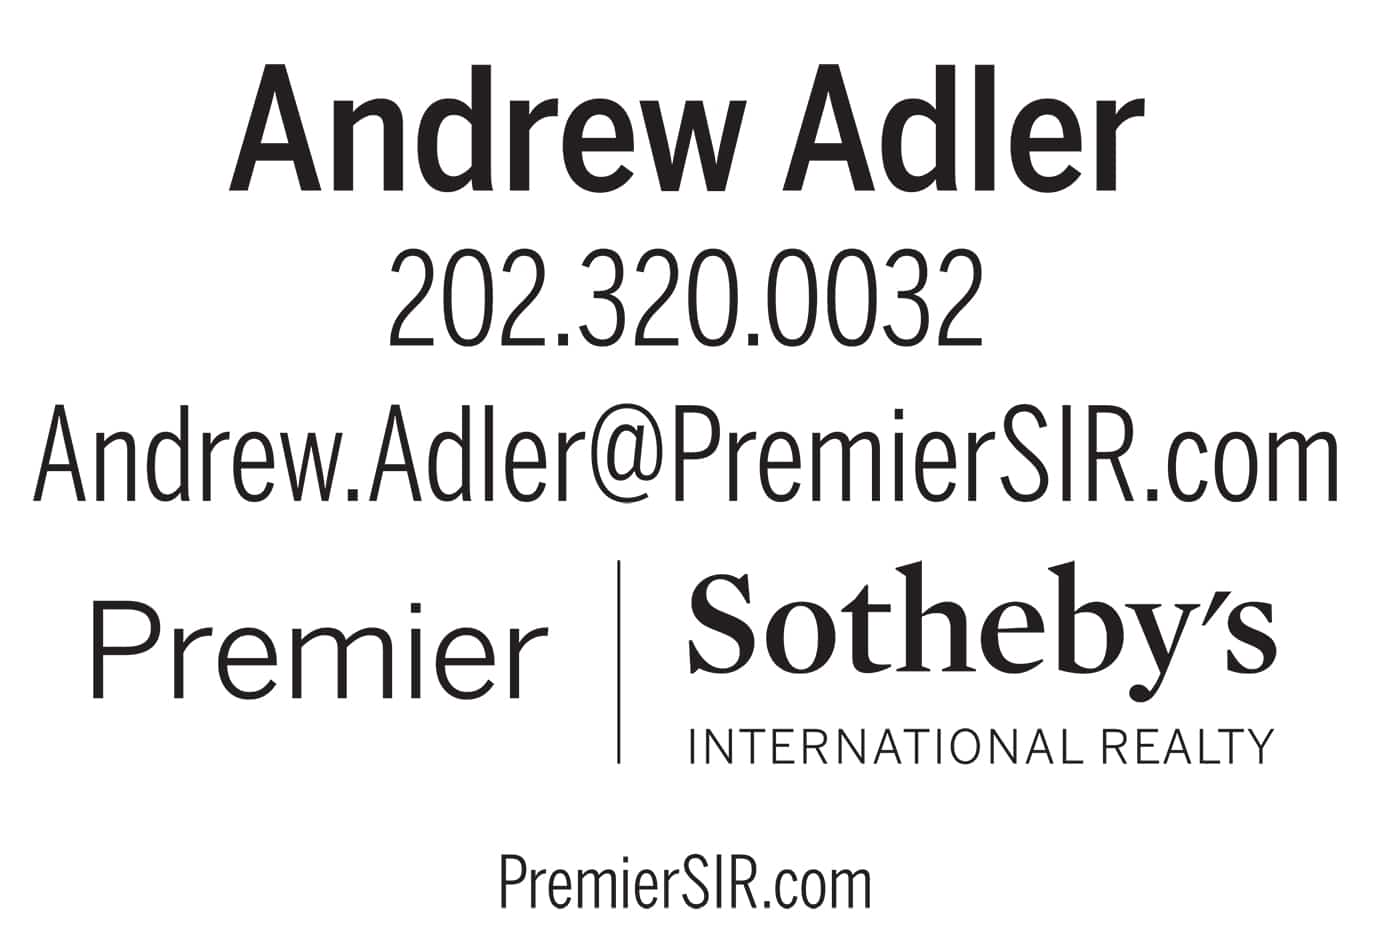 sotheby's realty andrew adler